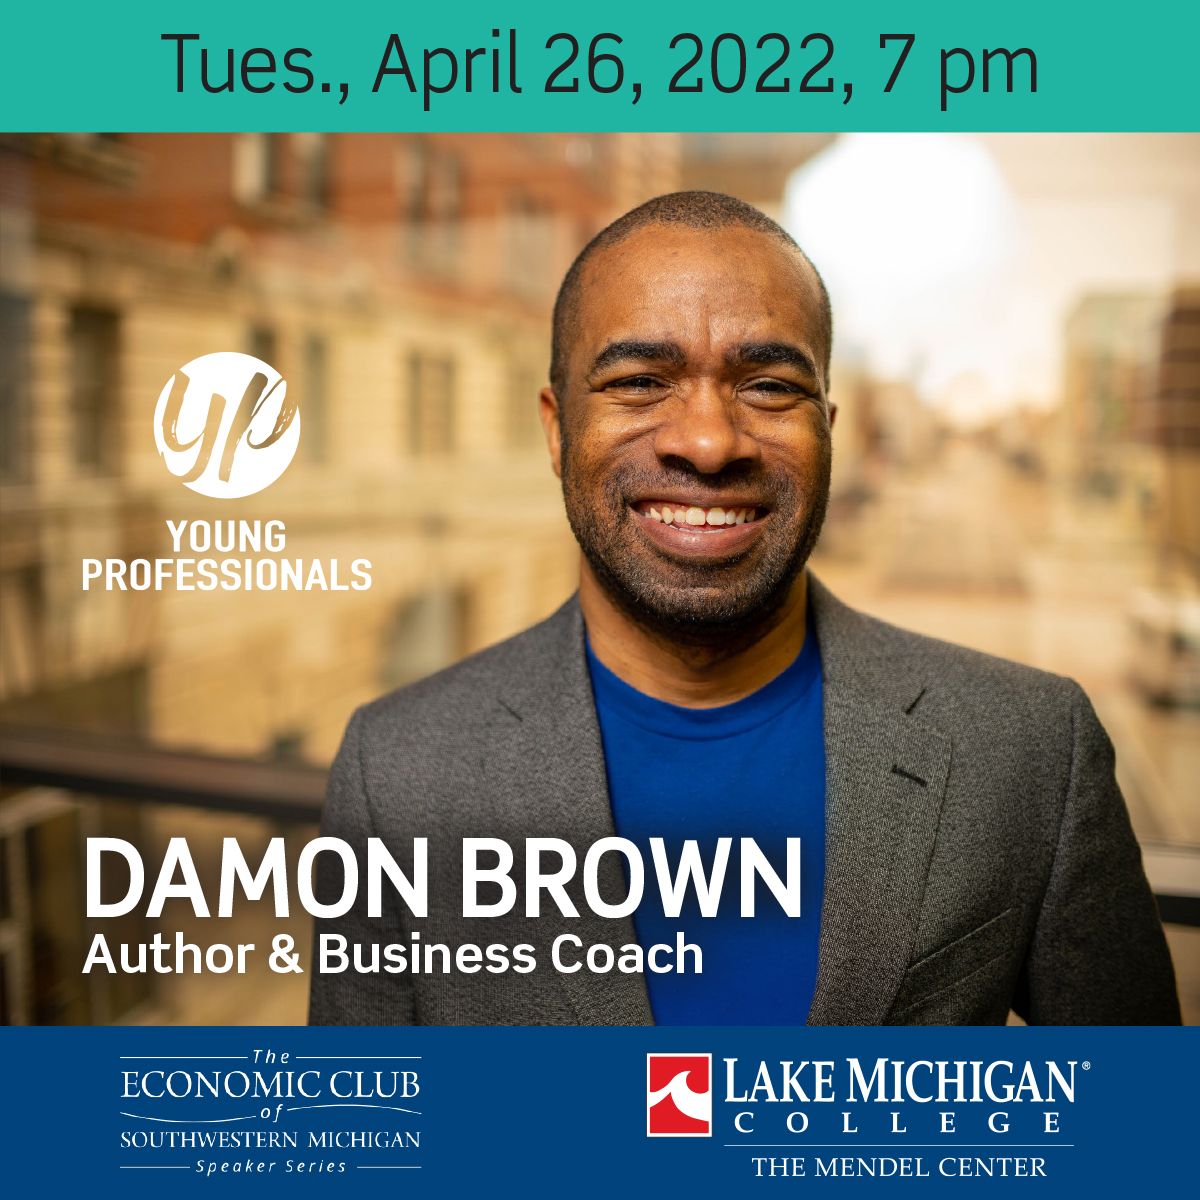 Damon Brown, Author & Business Coach - part of The Economic Club of Southwestern Michigan Speaker Series